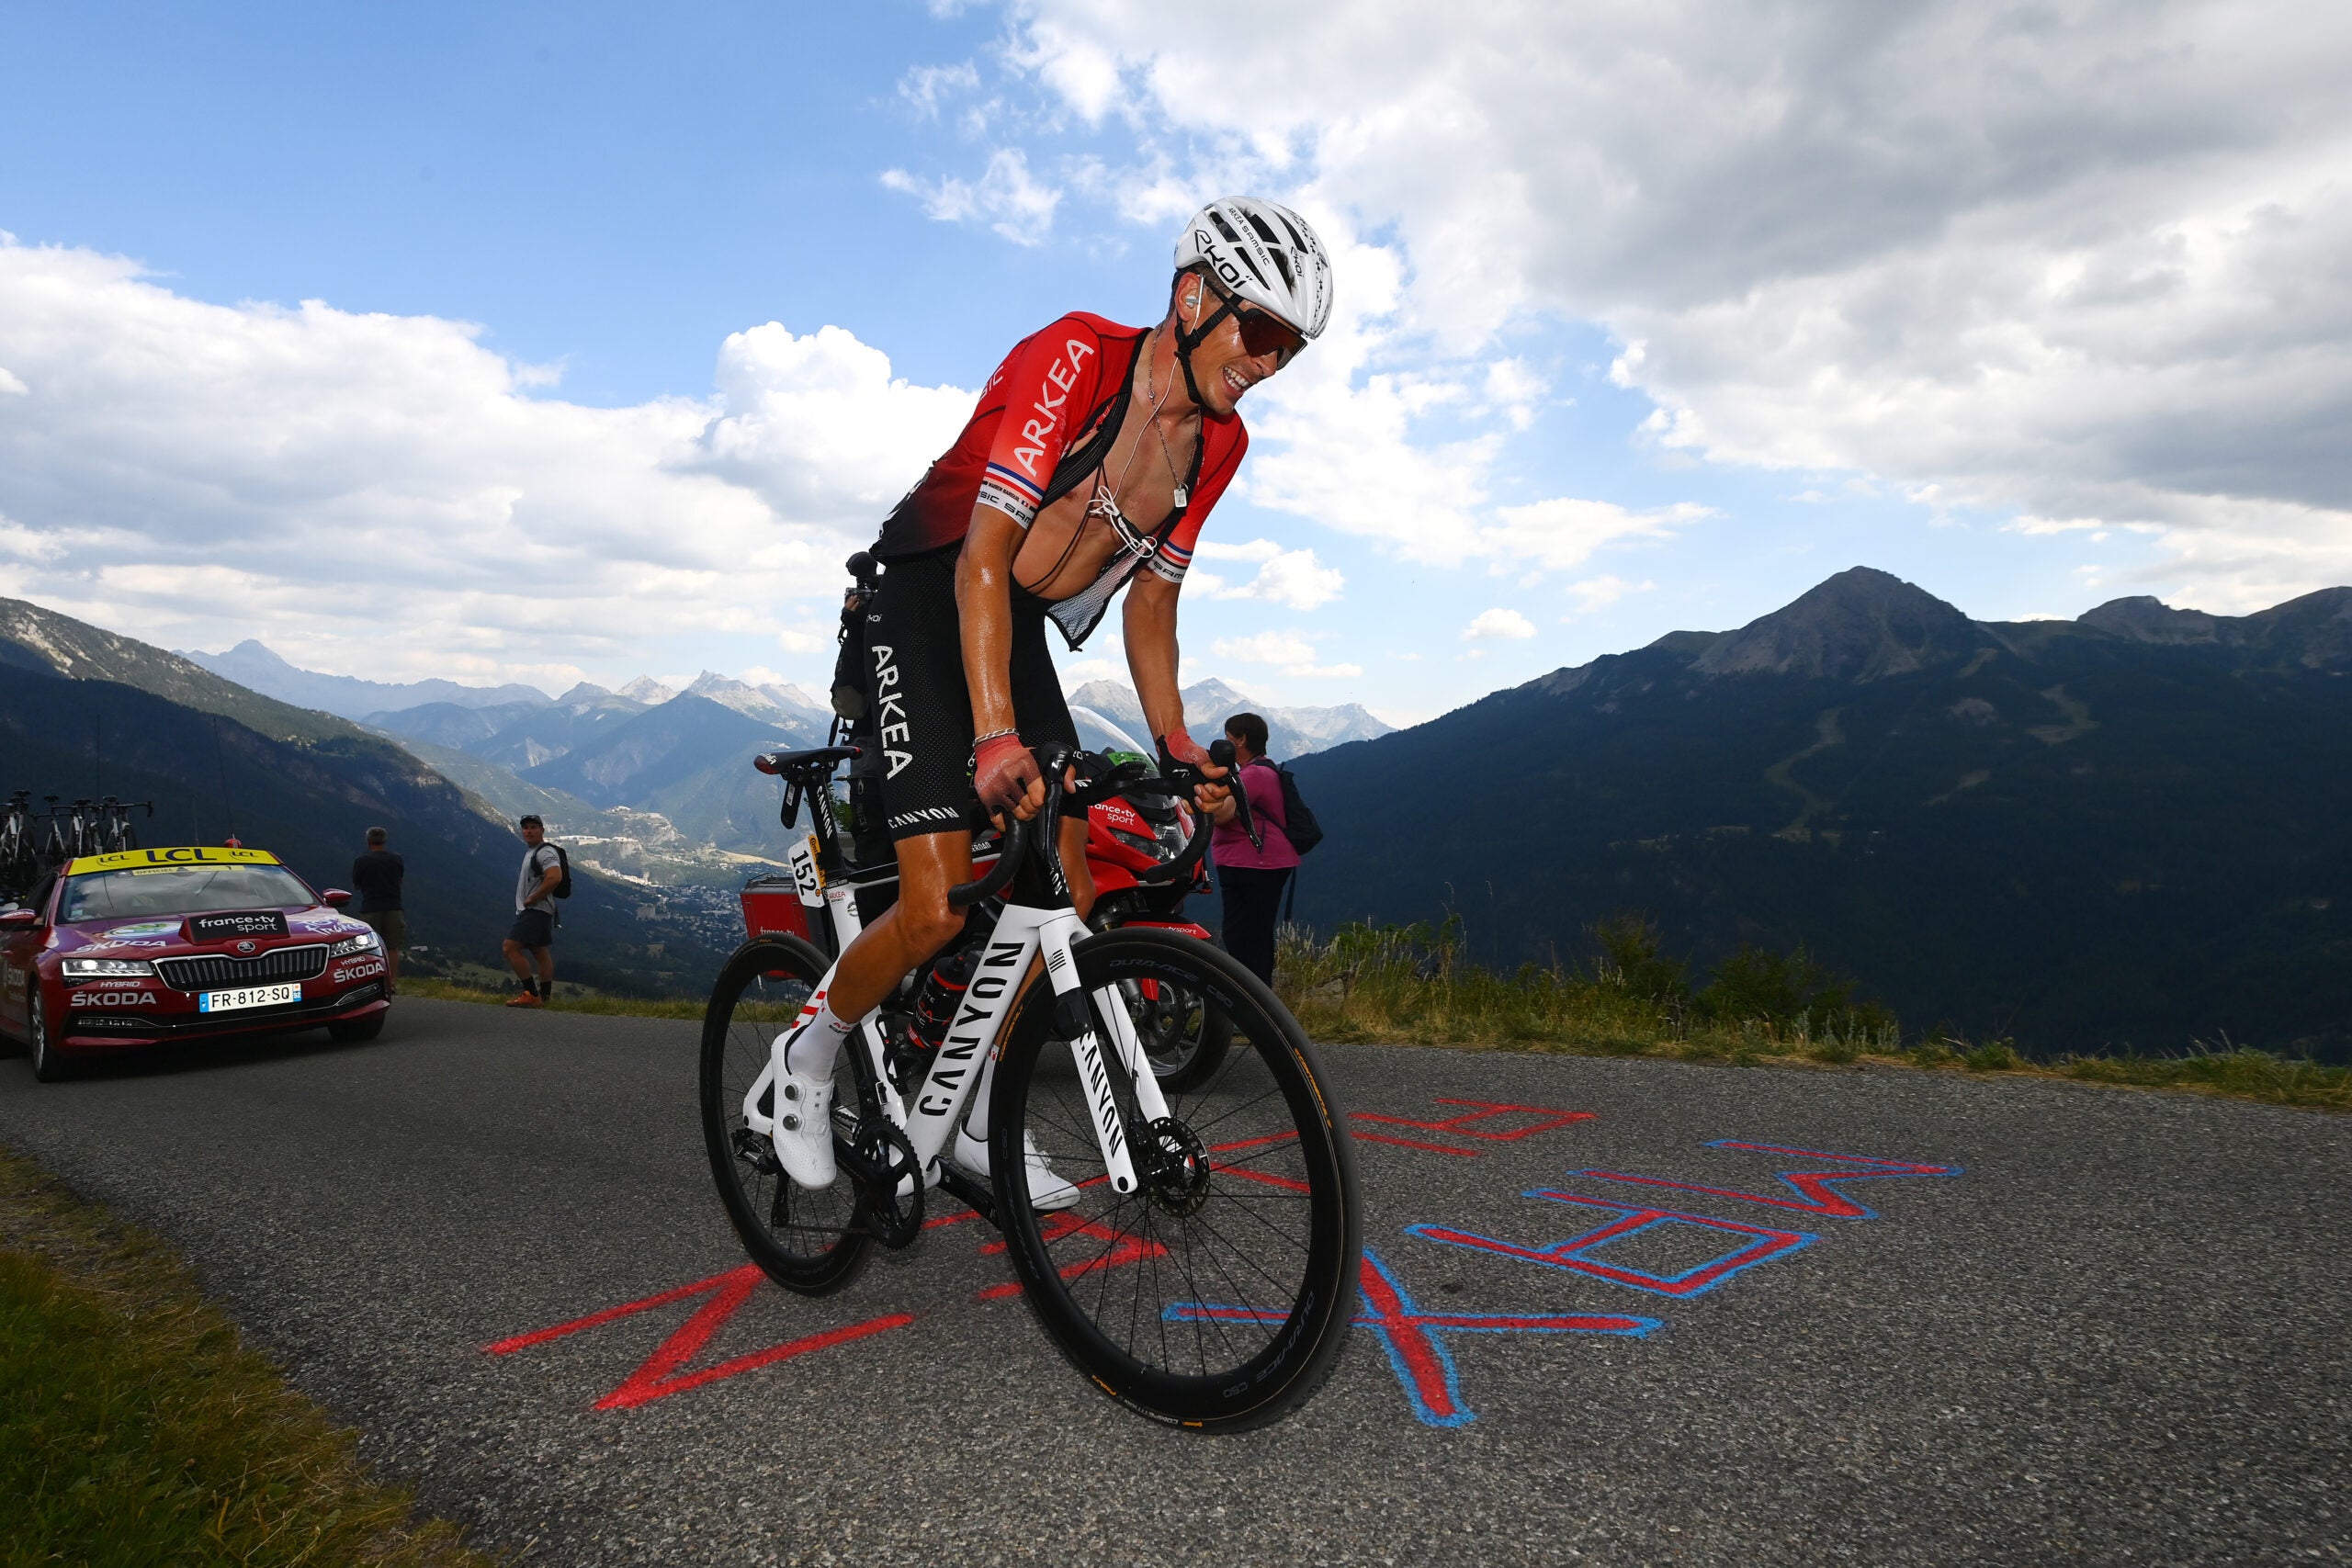 Tour de France No regrets for breakaway Warren Barguil as thoughts turn to King of the Mountains competition